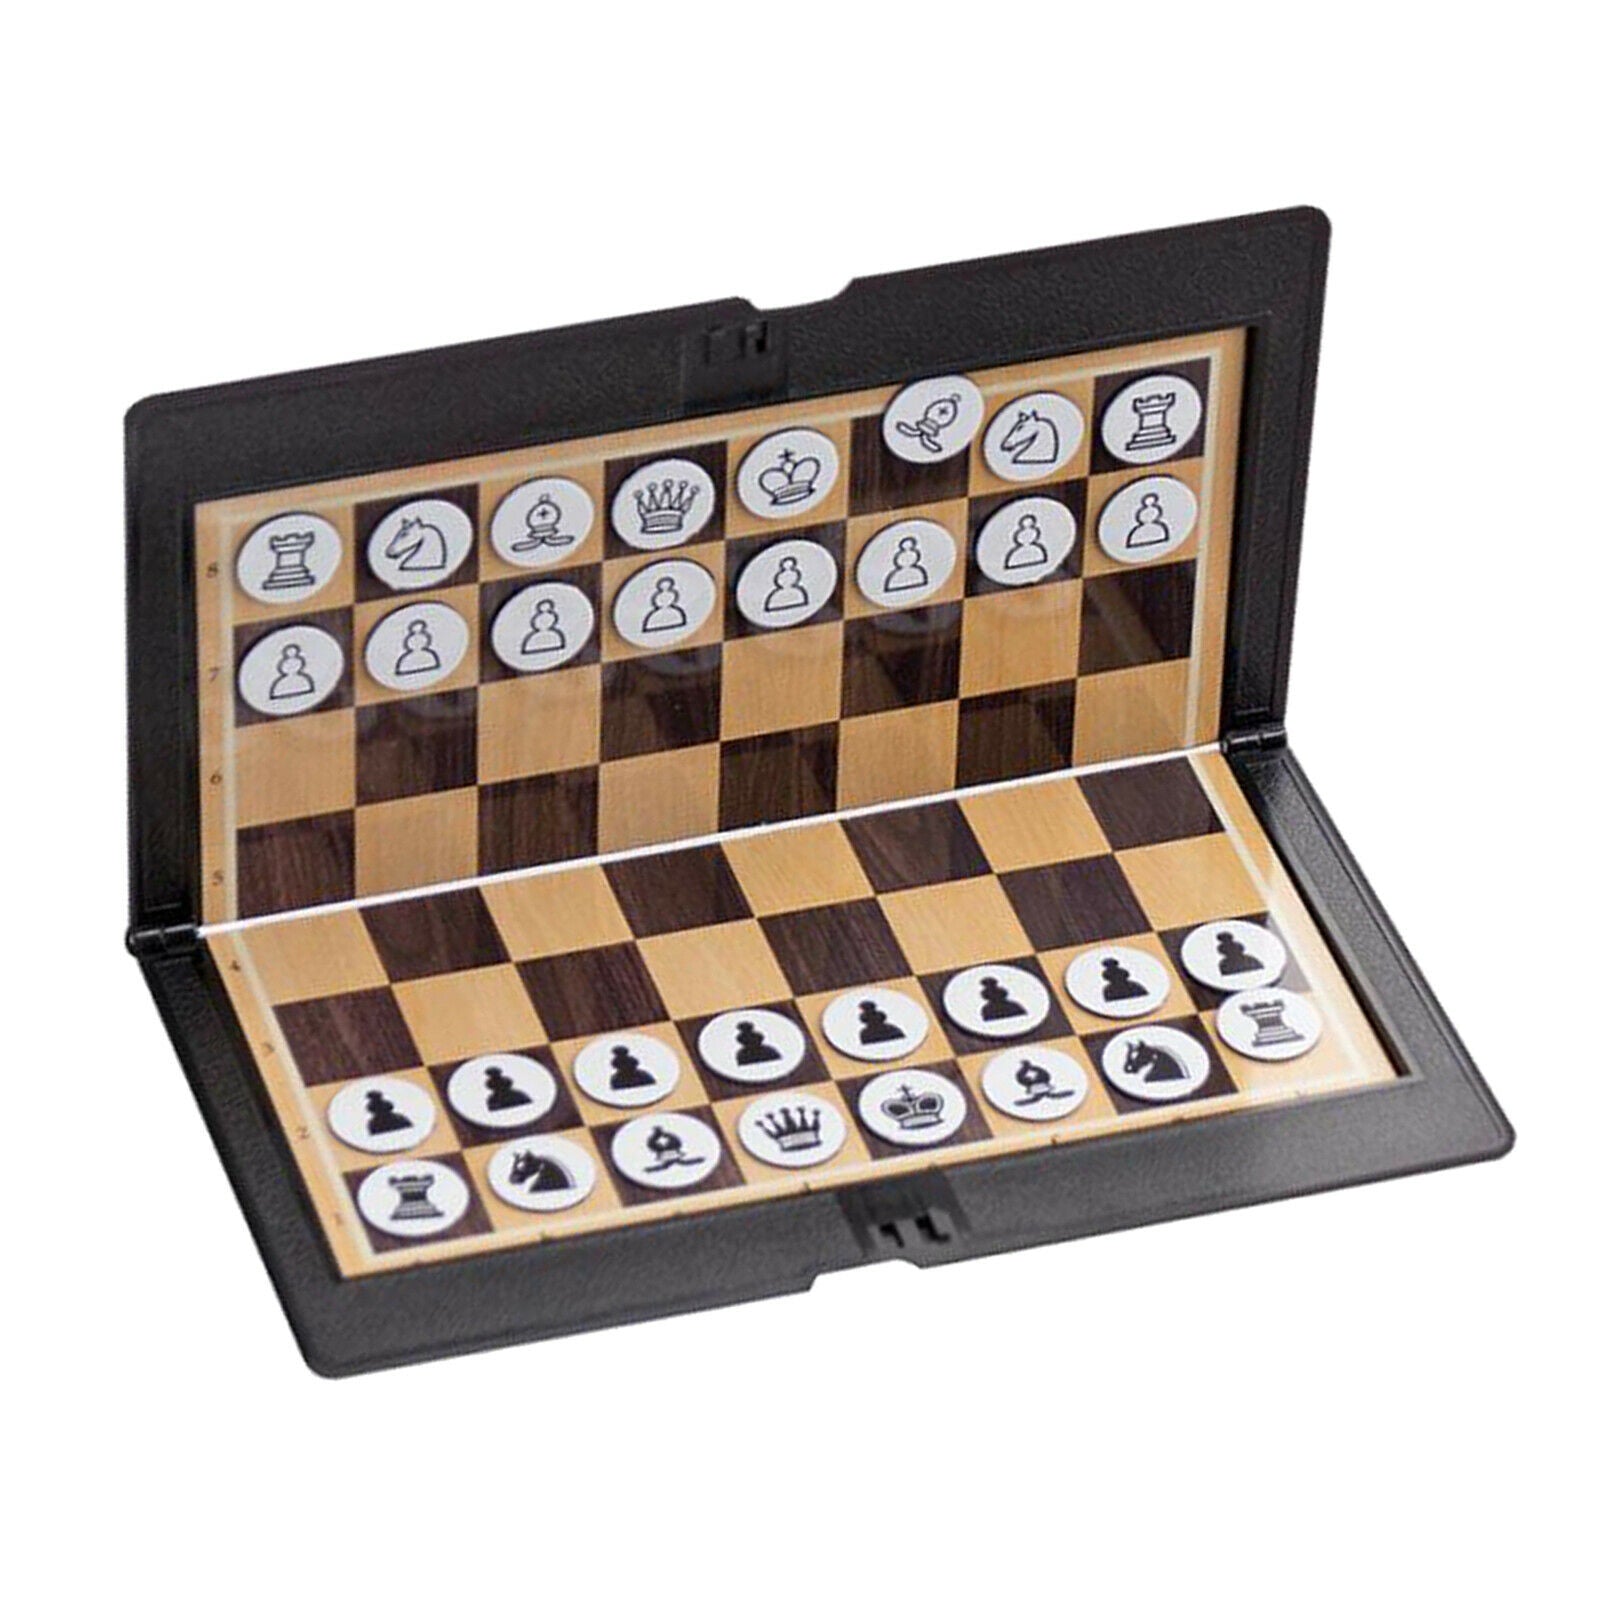 Foldable Chessboard Mini Chess Set Chess Board Game for Camping Family Game